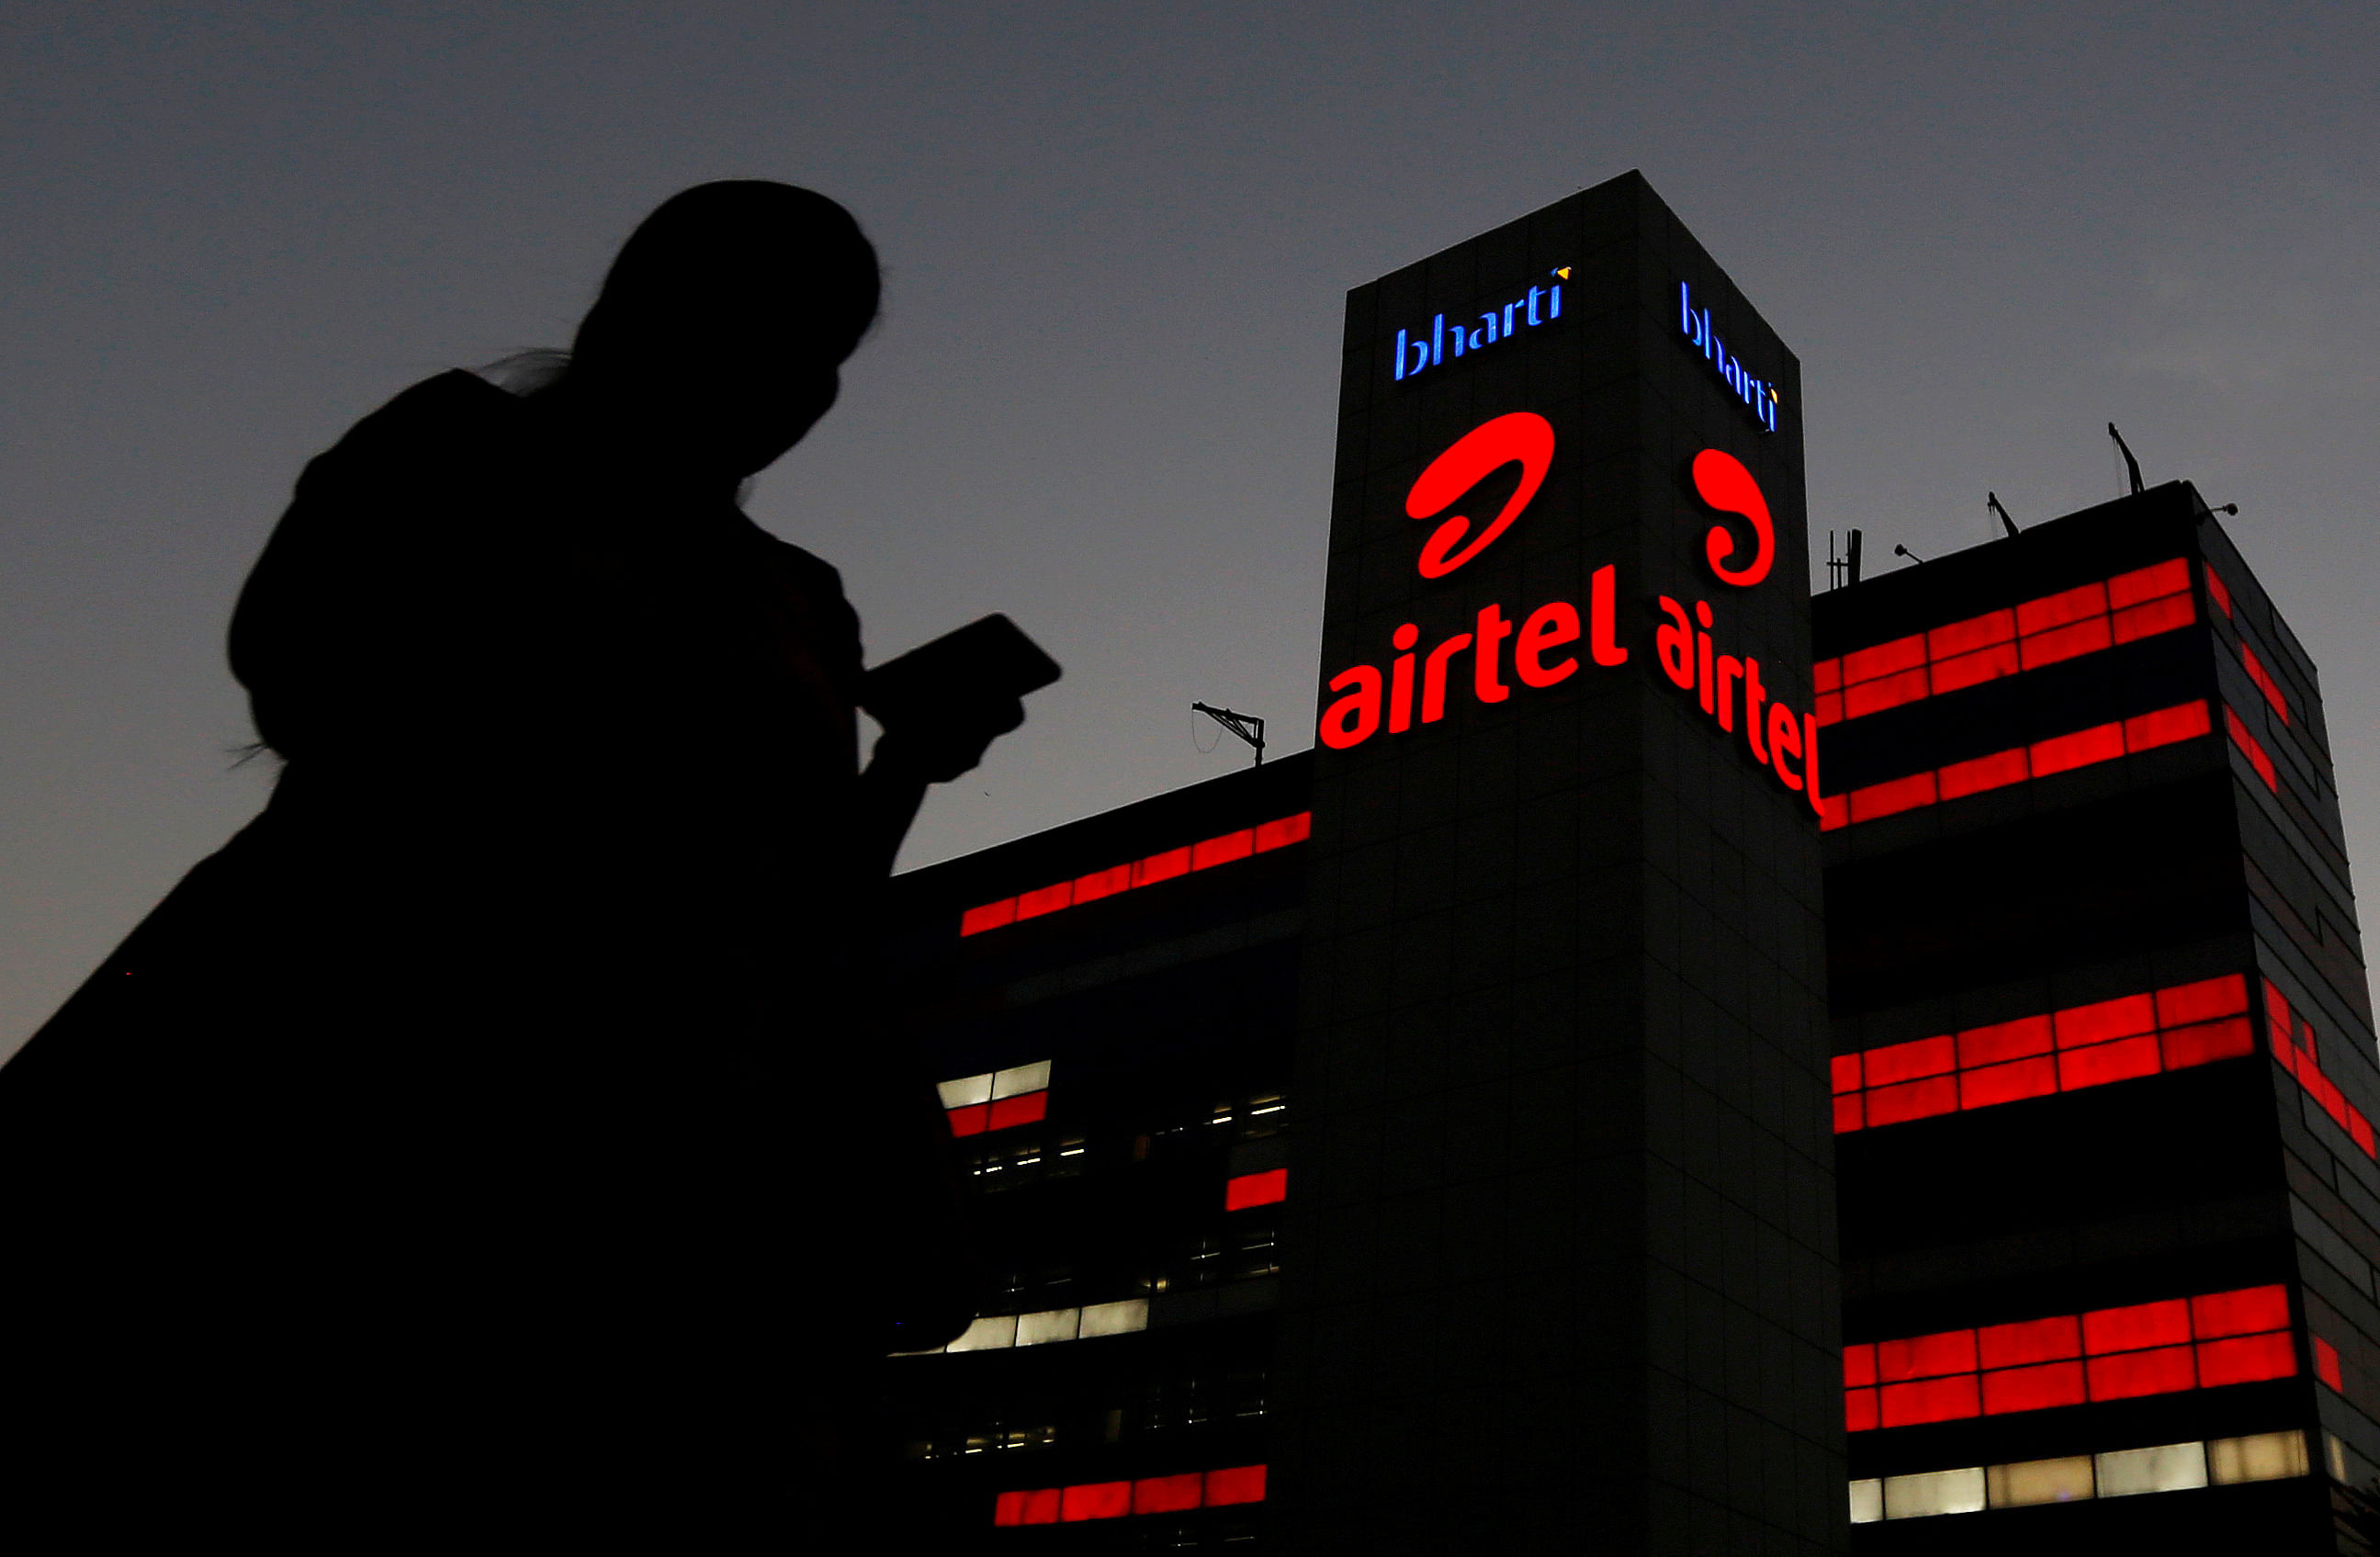 Dhotre informed the House that so far, Bharti Airtel has paid Rs 18,004 crore and Vodafone Idea has shelled out Rs 3,500 crore. (Credit: Reuters Photo)